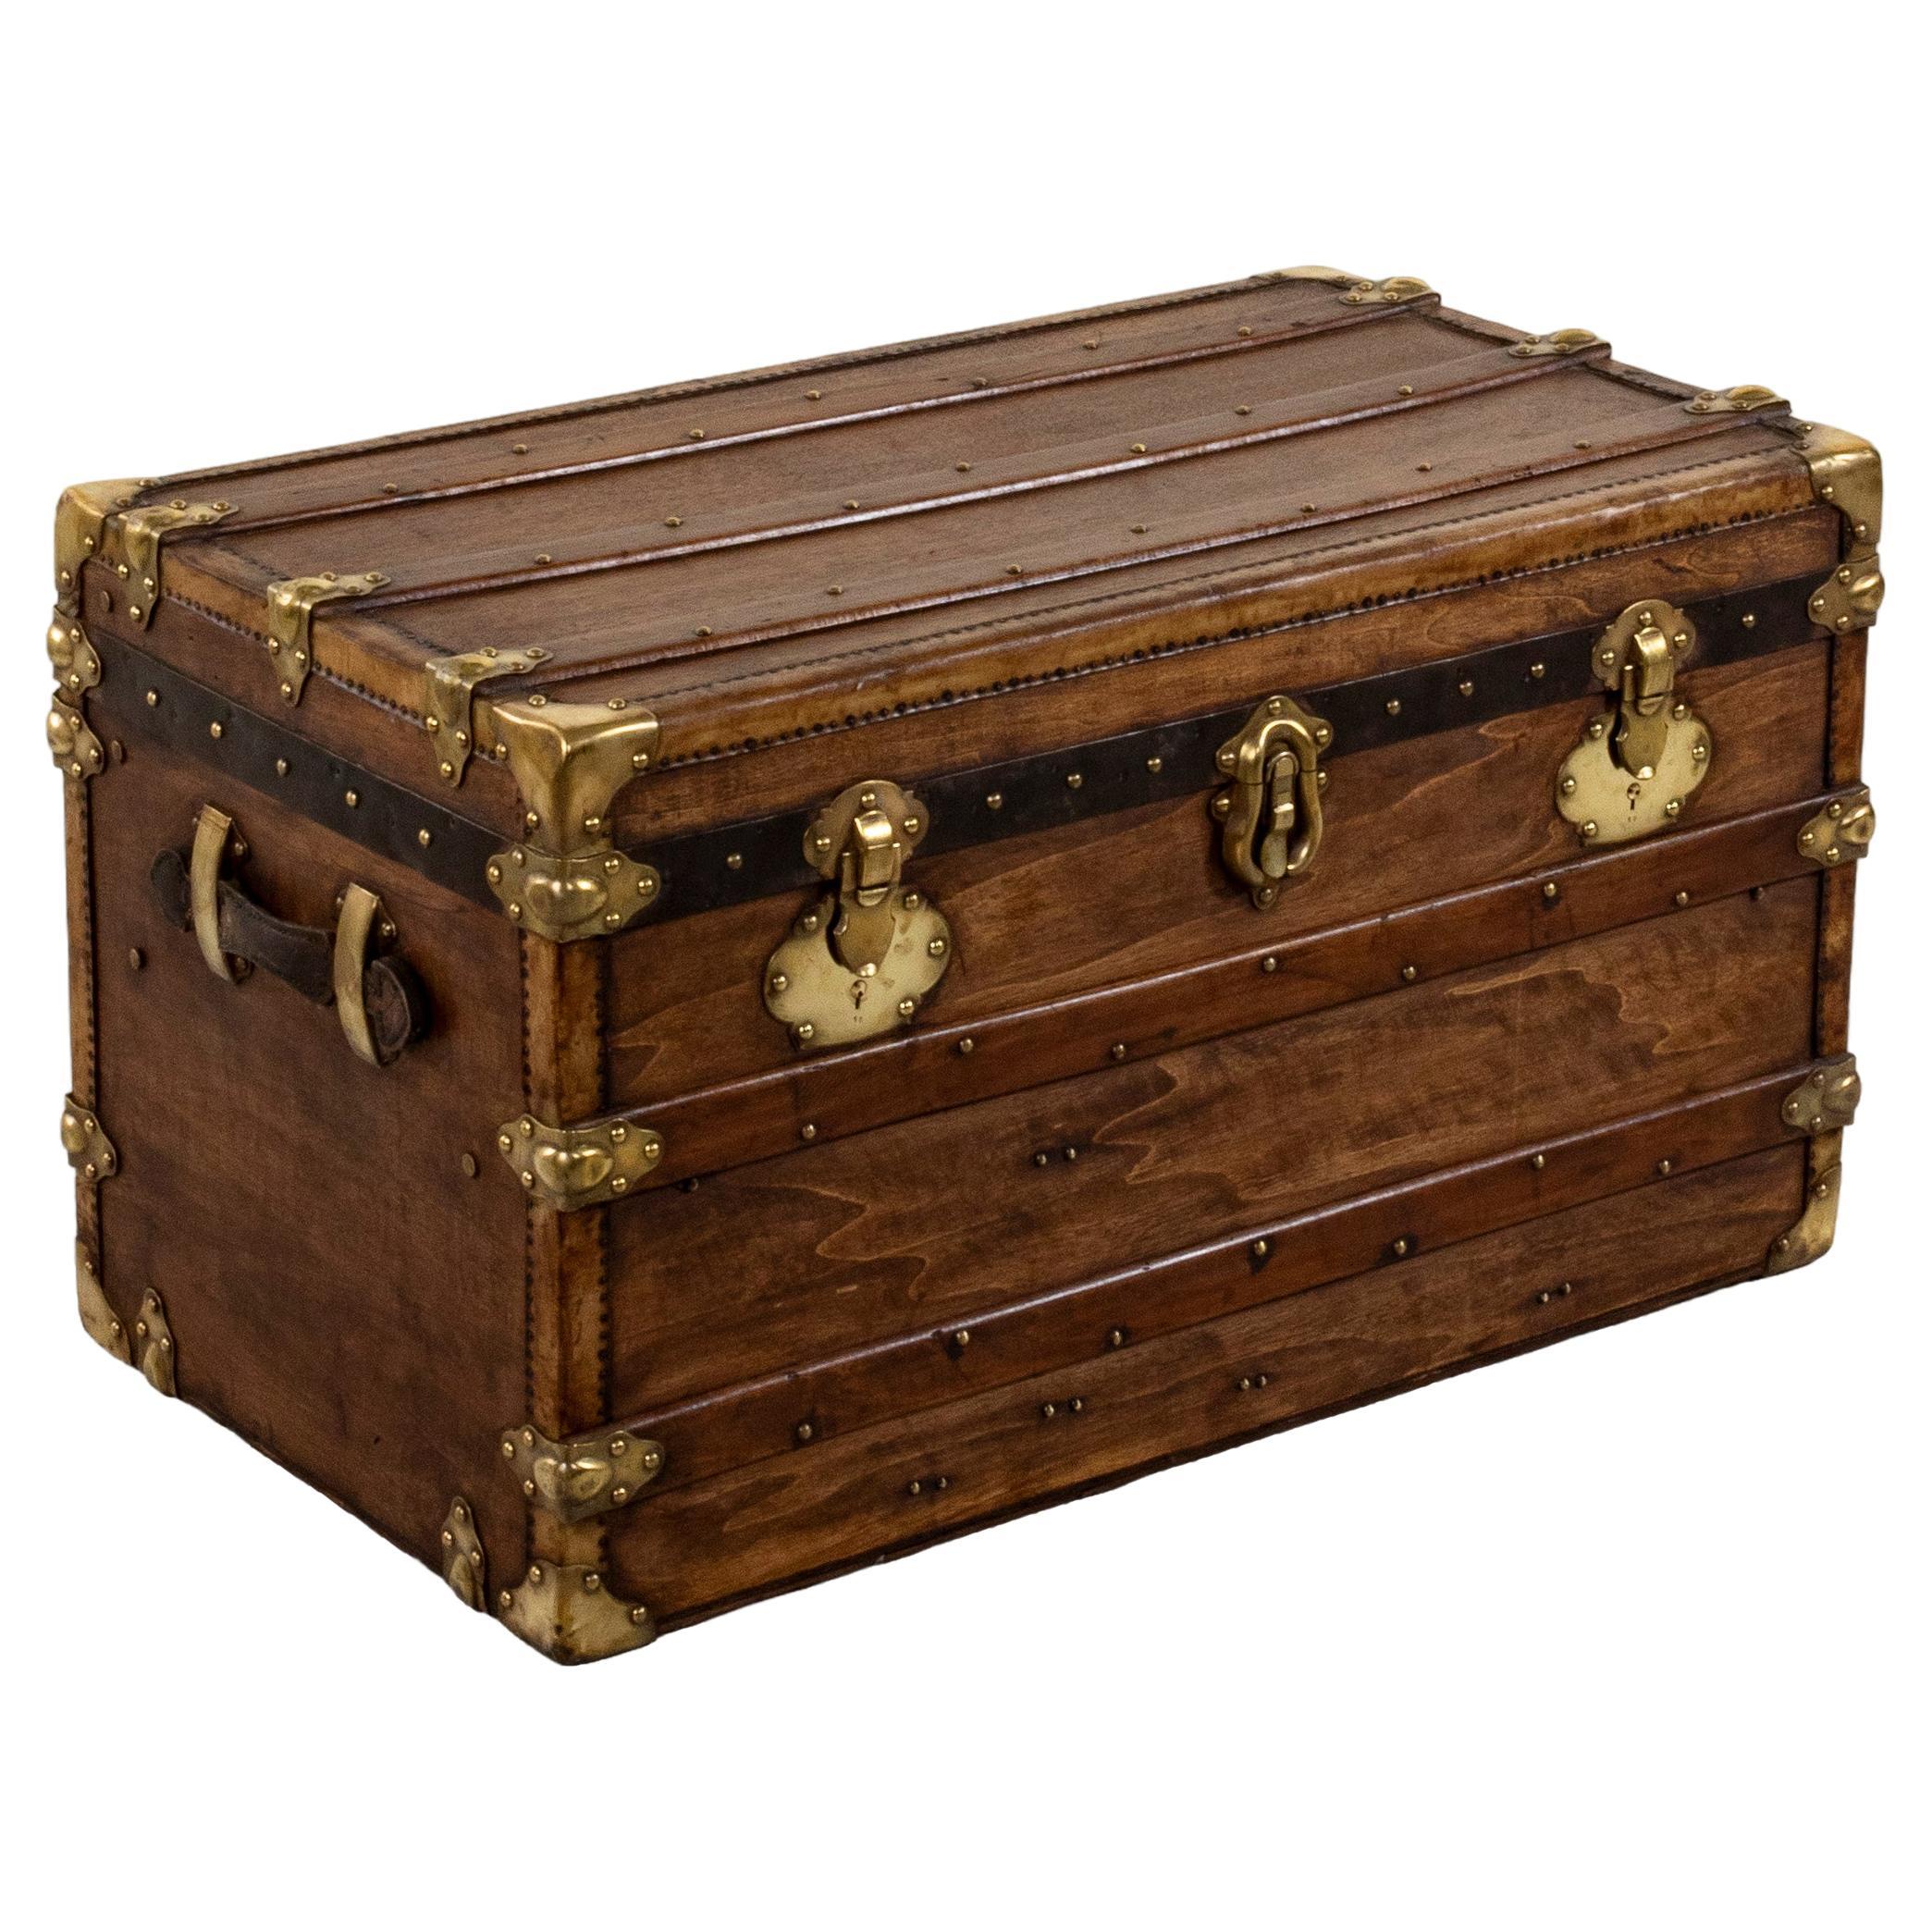 French Wooden Steam Trunk with Runners, Brass, and Leather Details, circa 1880